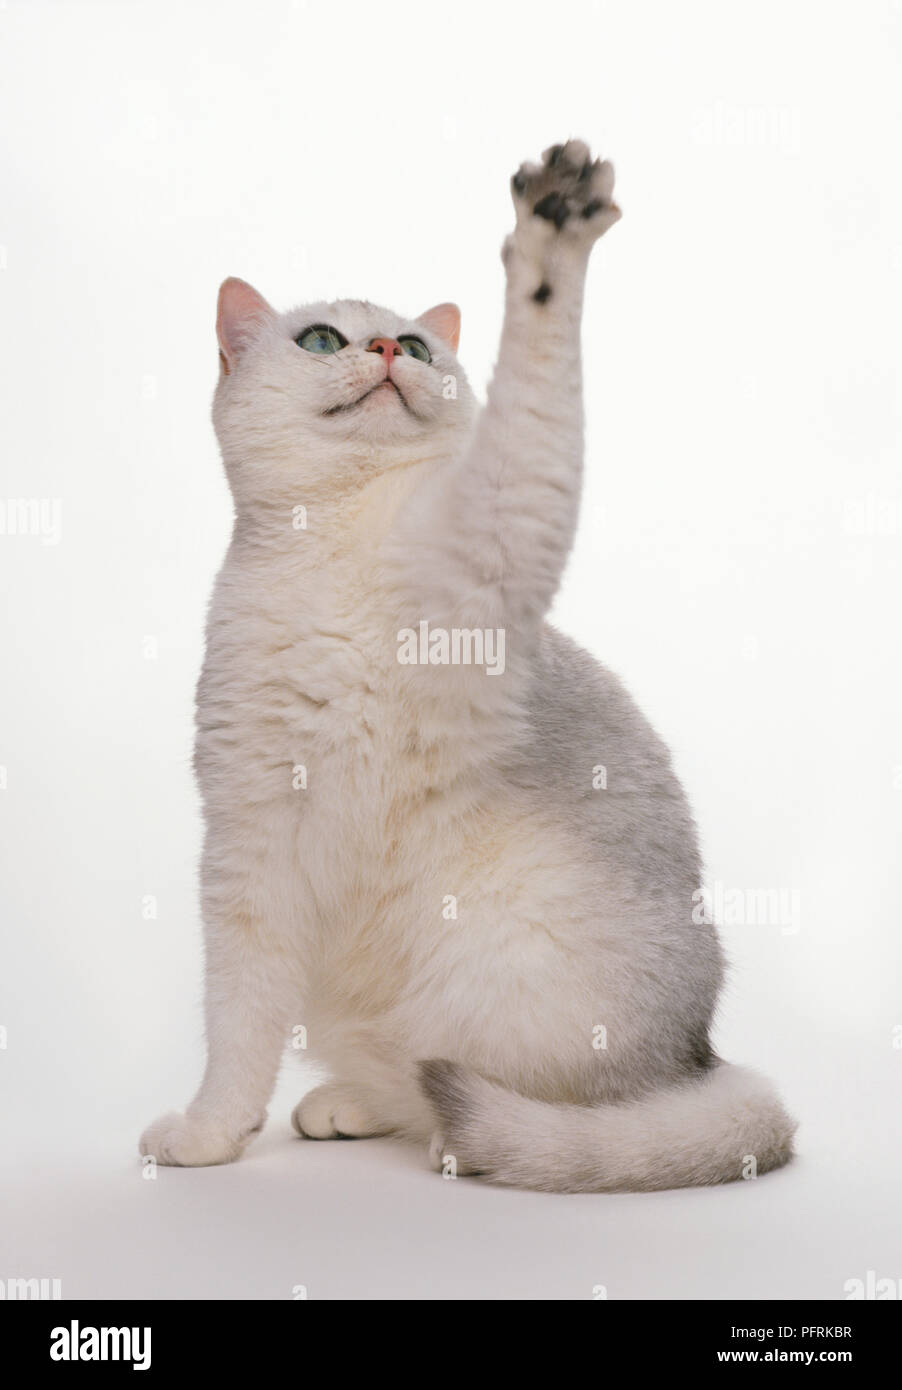 Black Tipped British Shorthair reaching up with paw Stock Photo